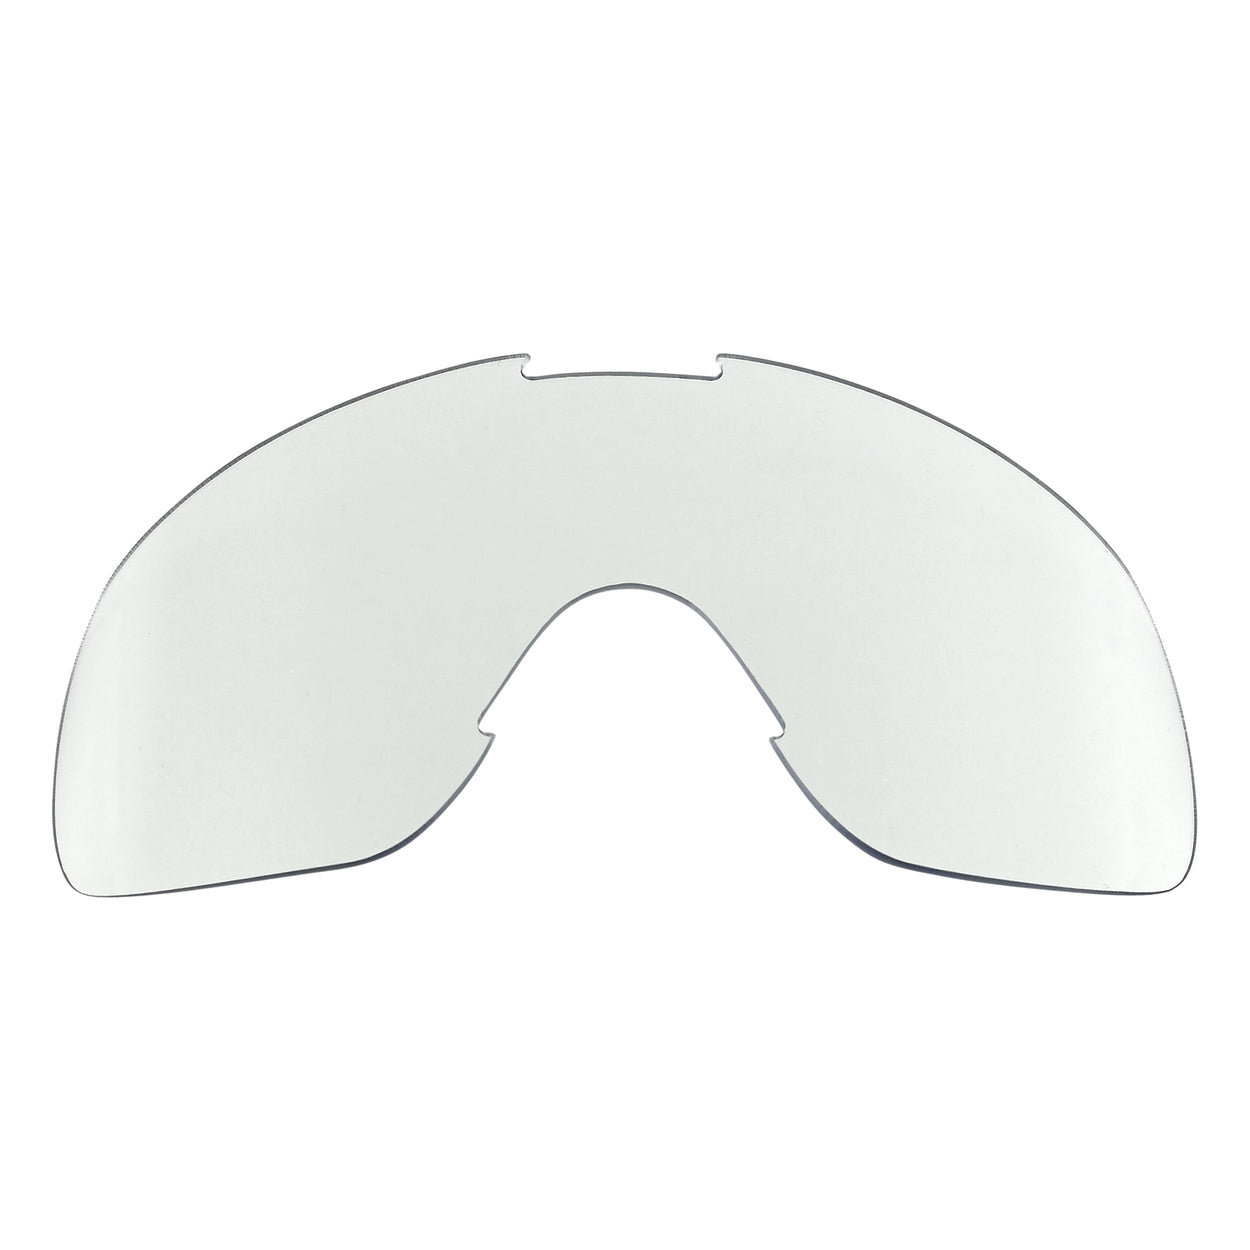 Overland 2.0 Goggle Lens - Clear